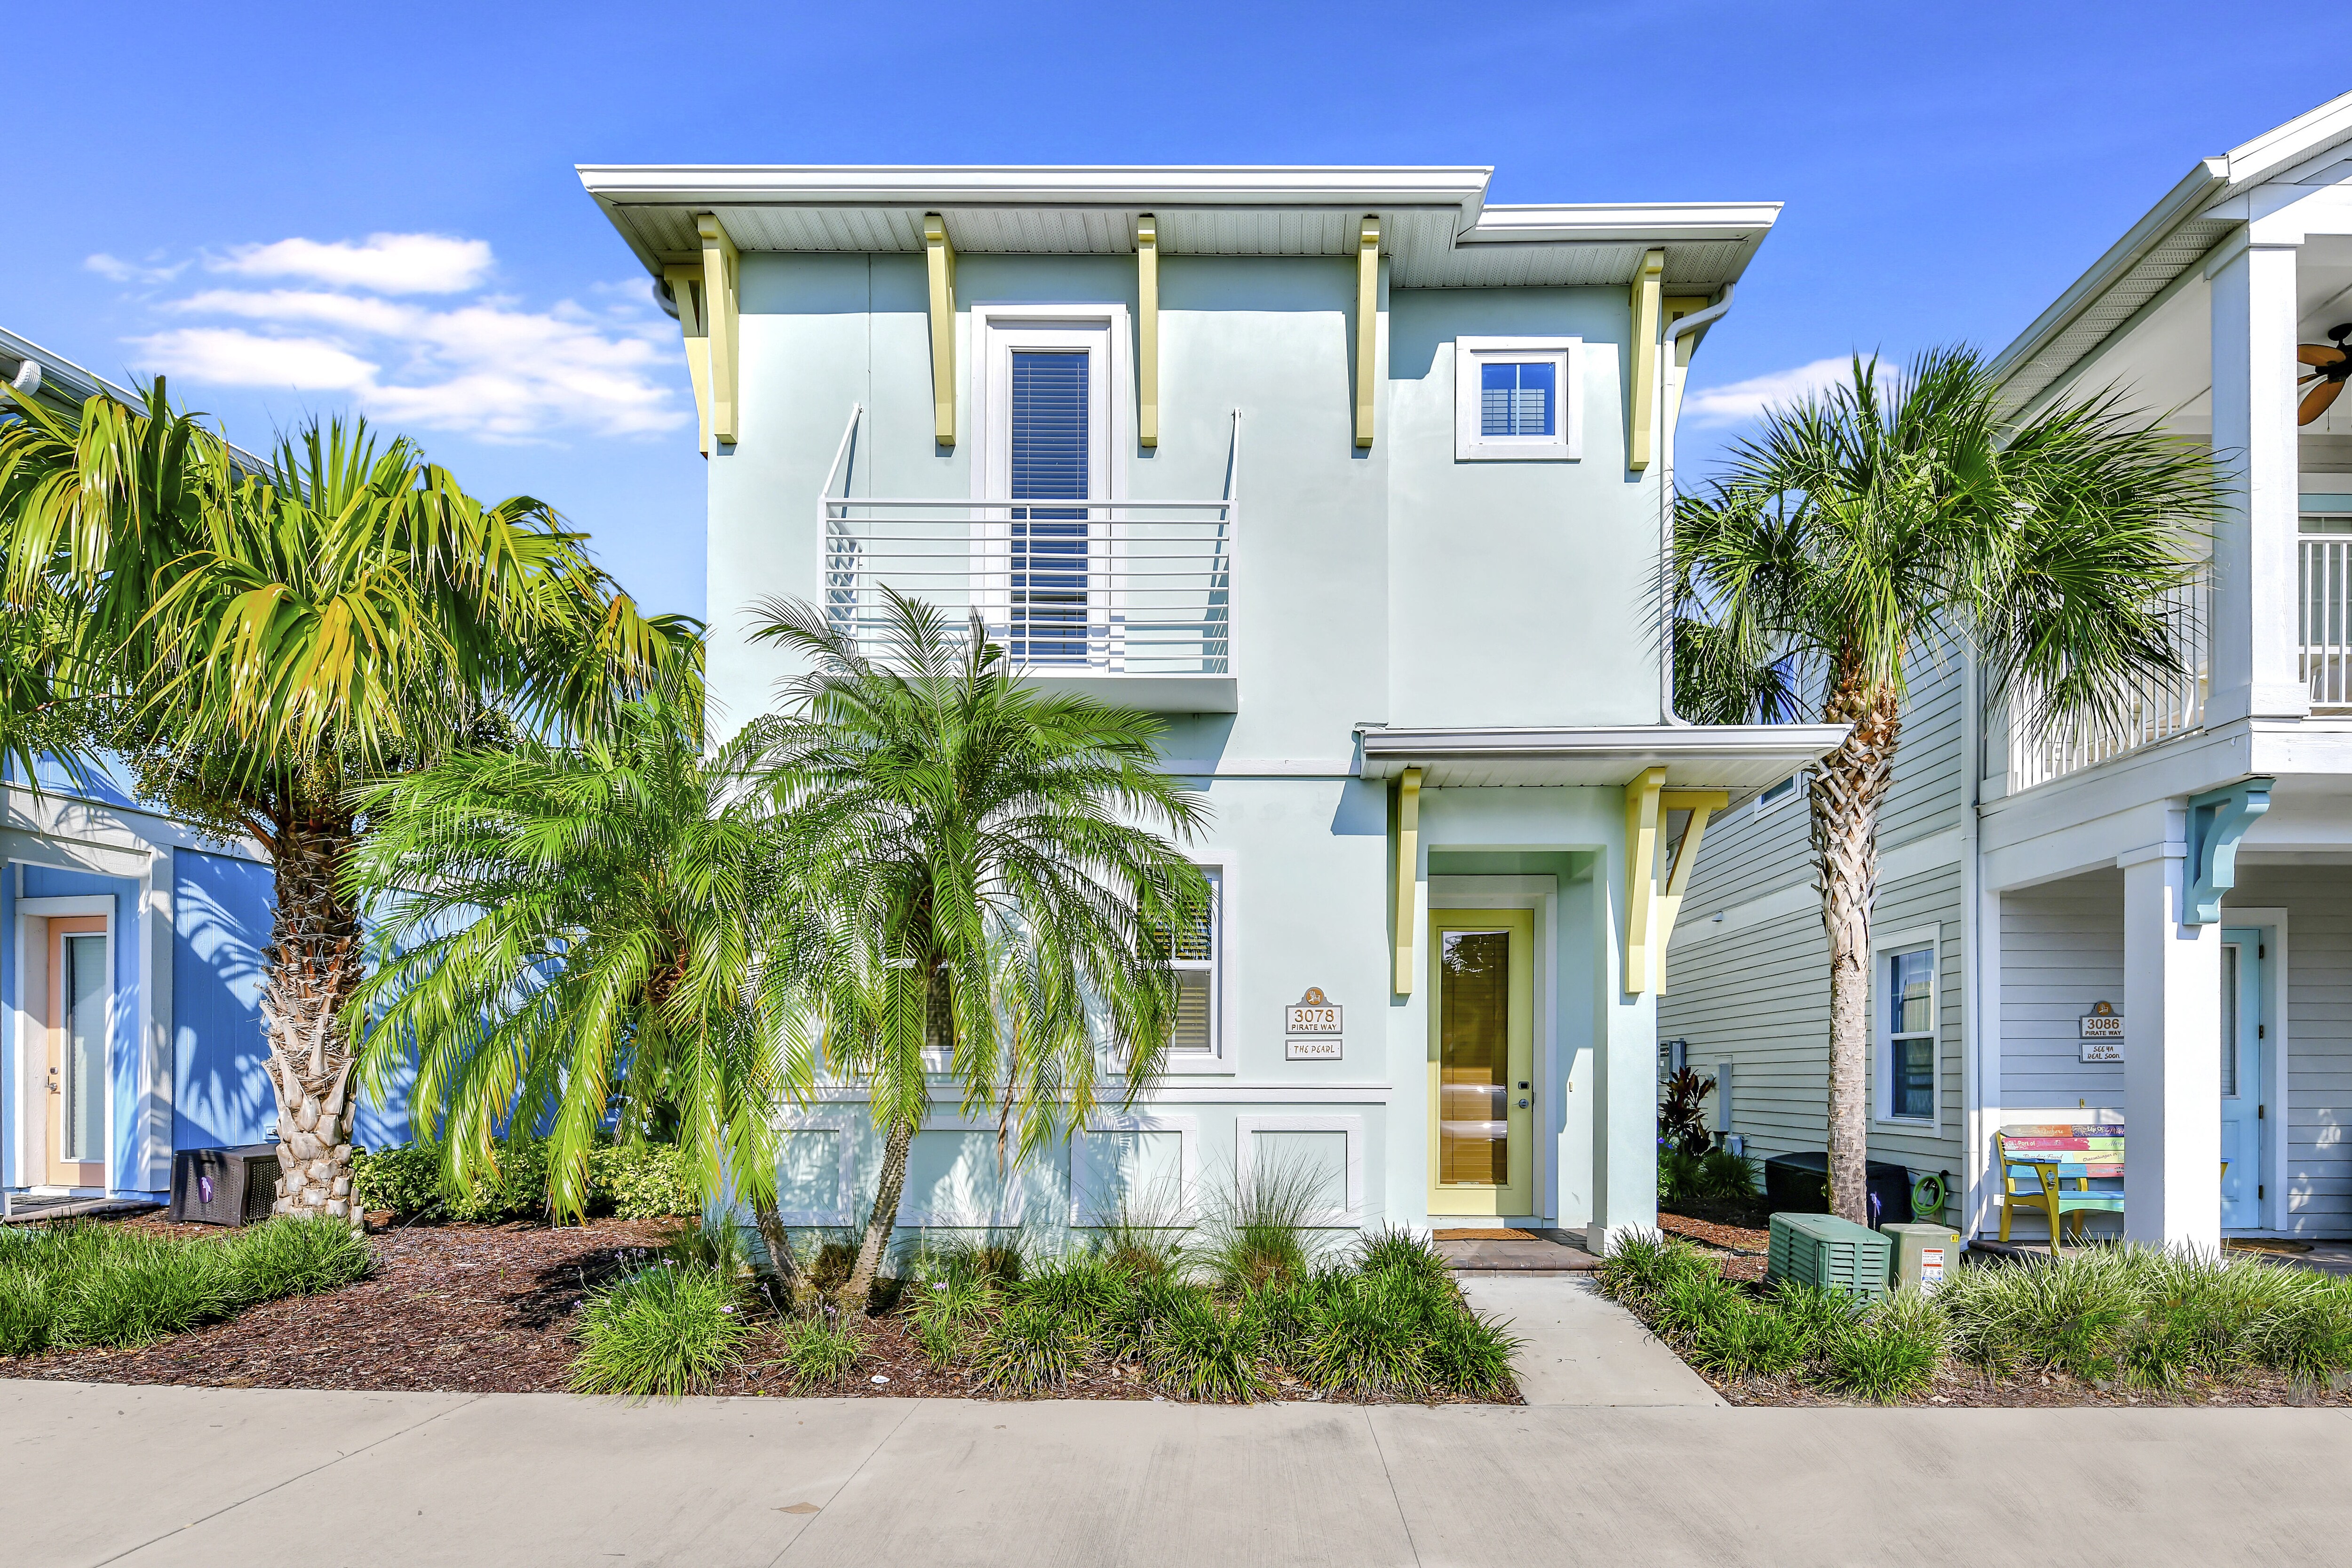 Property Image 1 - The Pearl Cottage near Disney with Margaritaville Resort Access - 3078PI